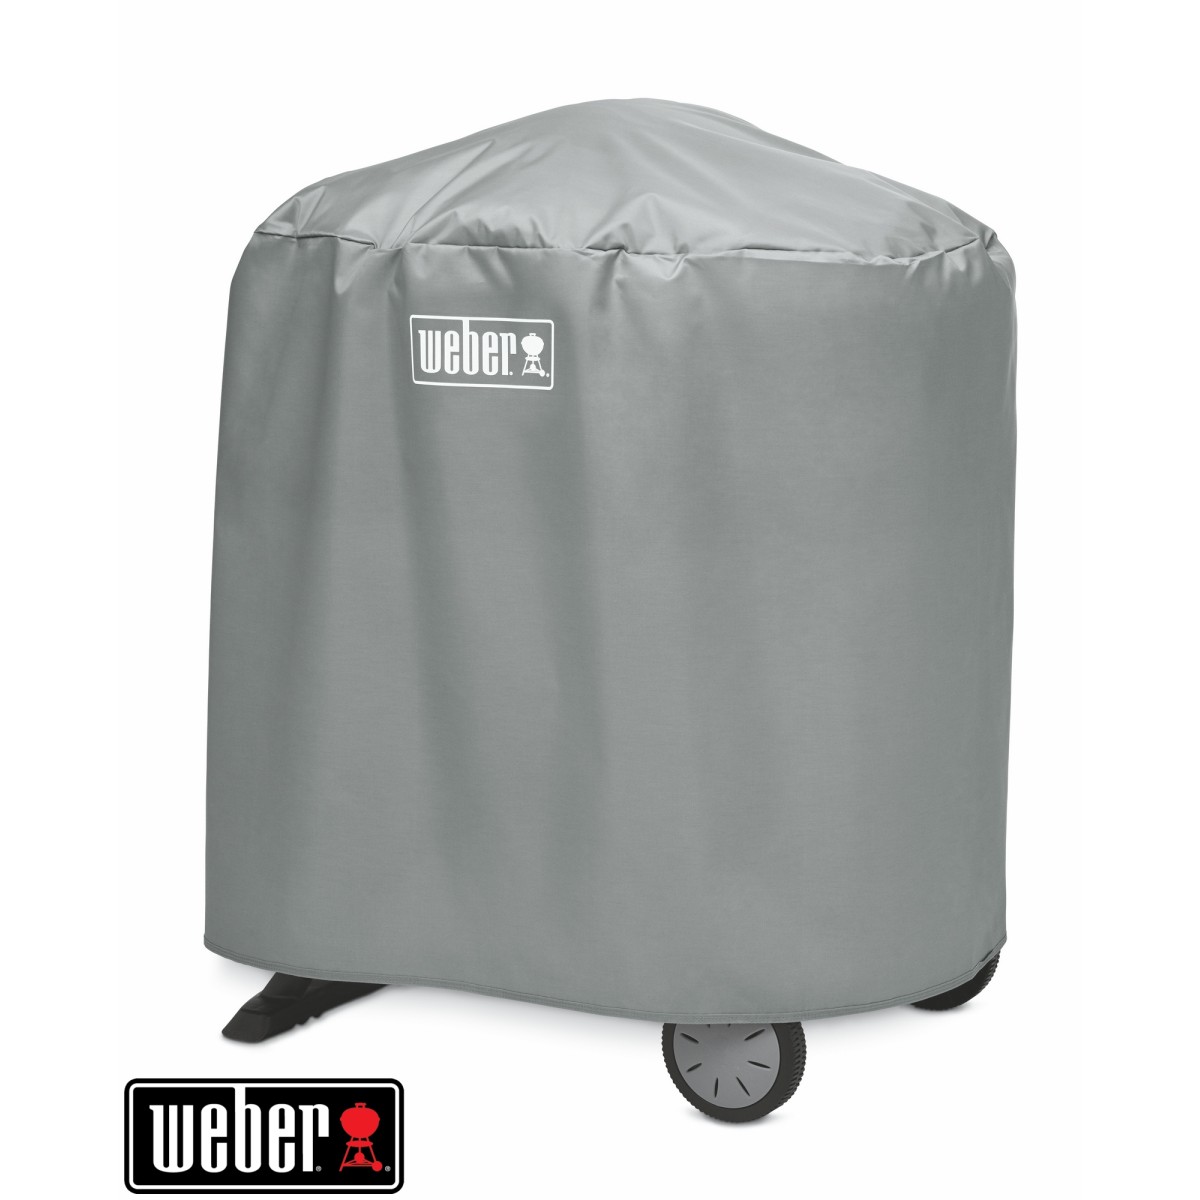 WEBER Barbecue Cover - Fits Q 100/1000 and 200/2000 with stand or permanent cart, 7177